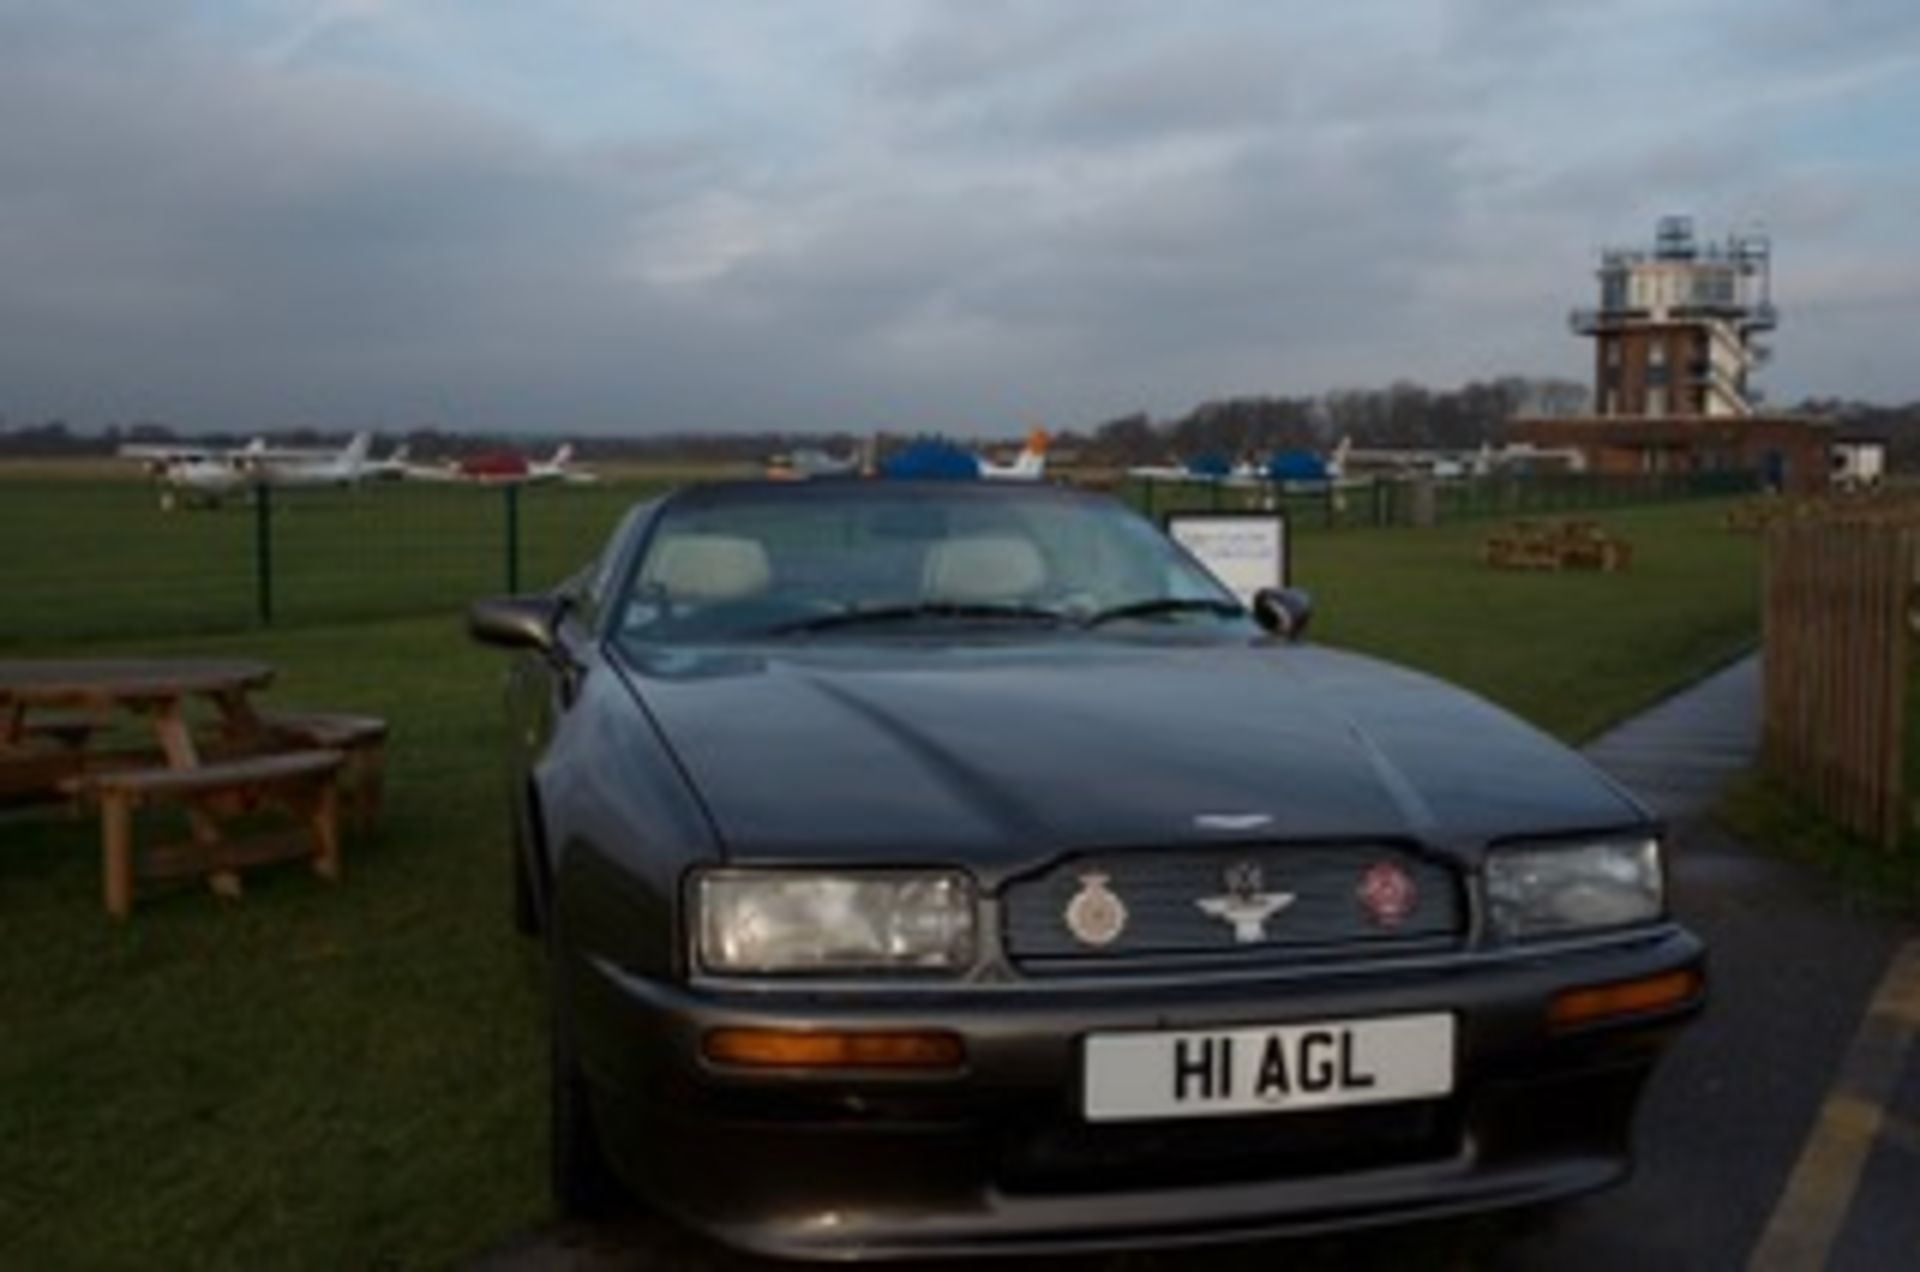 1993 Aston Martin Virage Volante - Having 11 months MOT and aviators number plate H1 AGL - Image 15 of 48